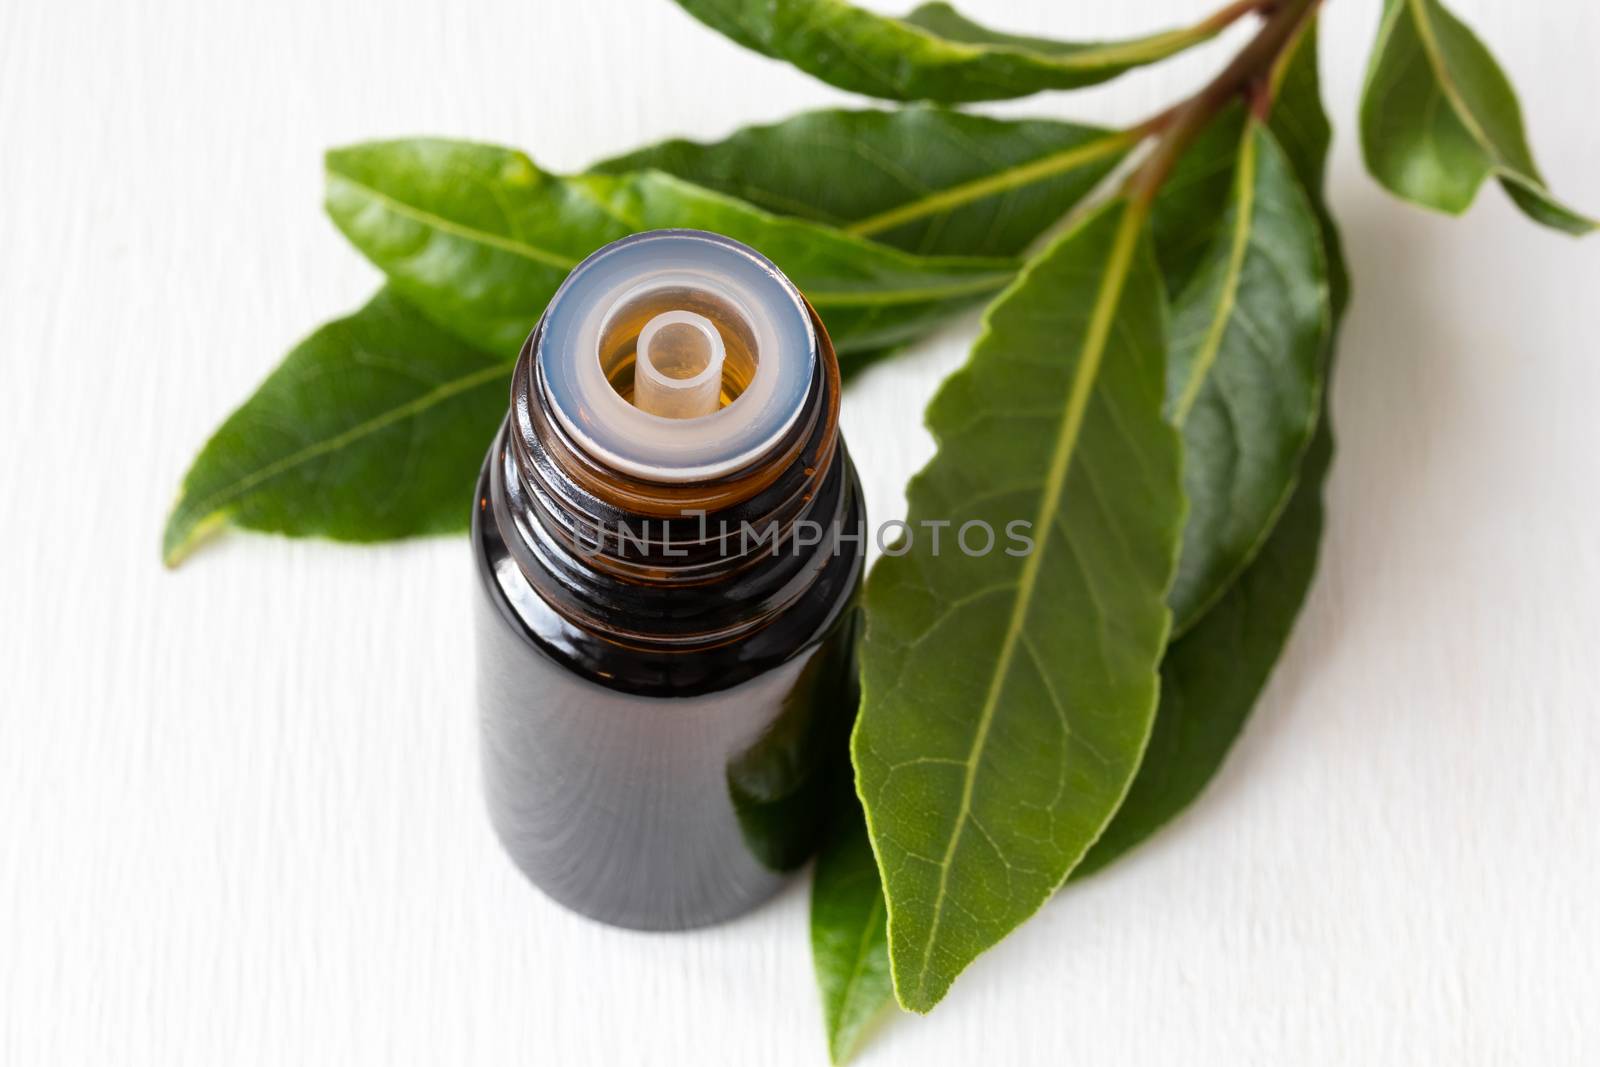 A bottle of essential oil with fresh bay leaves on white background